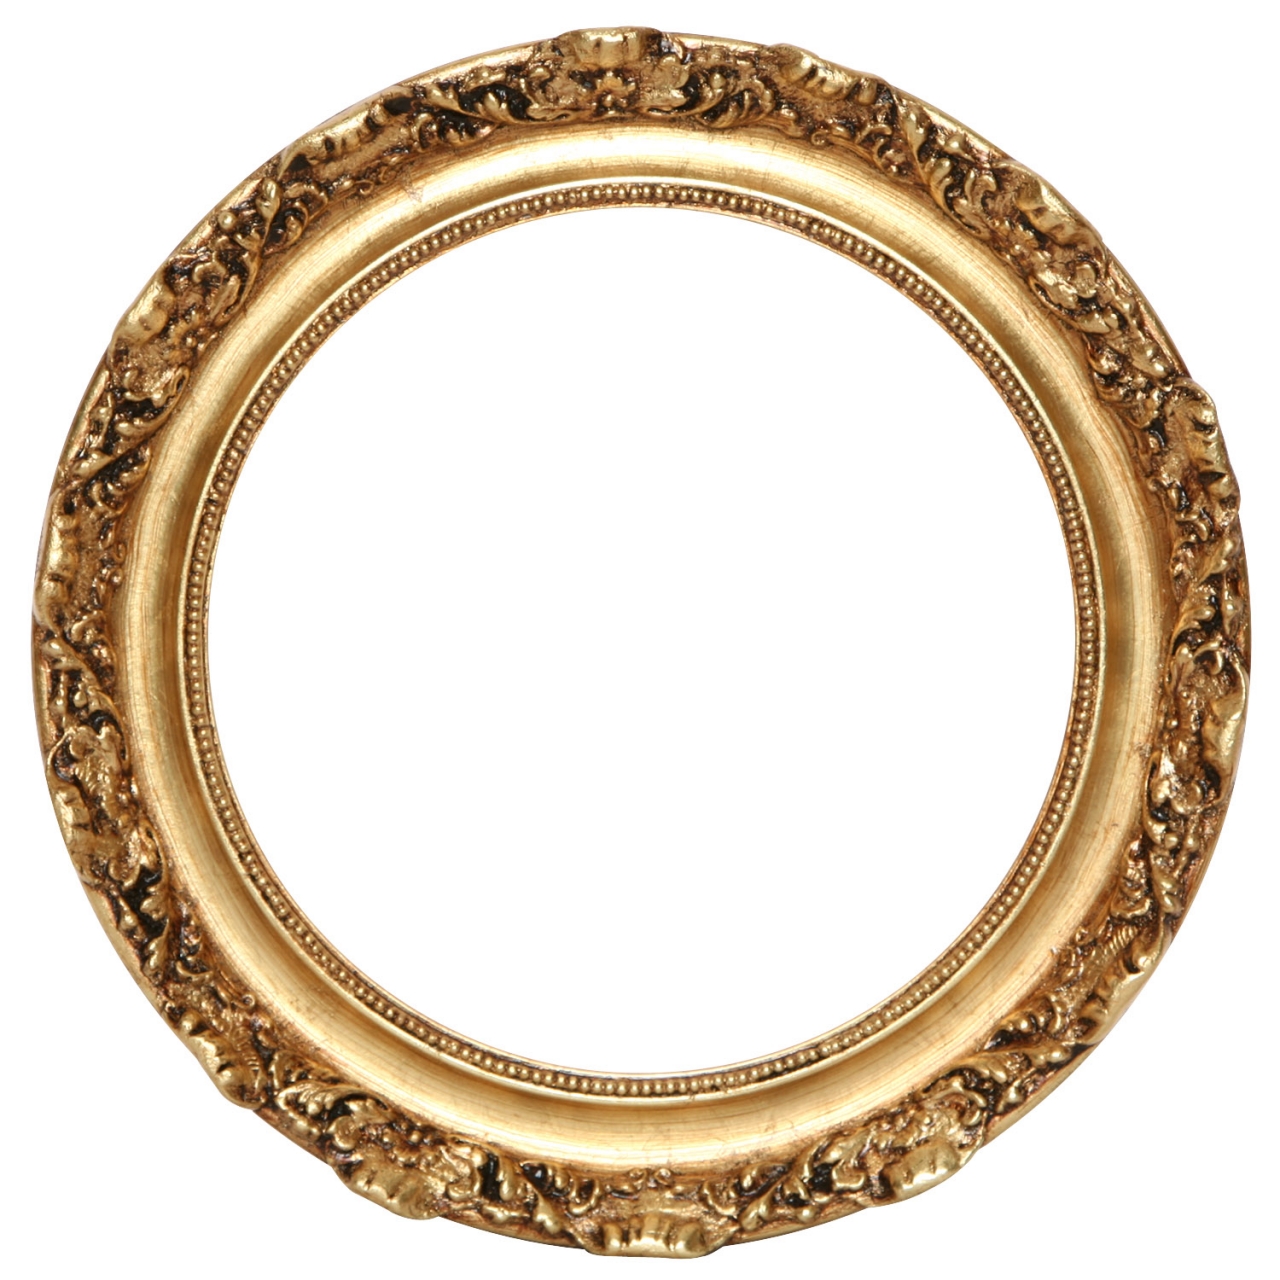 Circle Frame Free Cliparts That You Can Download To You Computer And